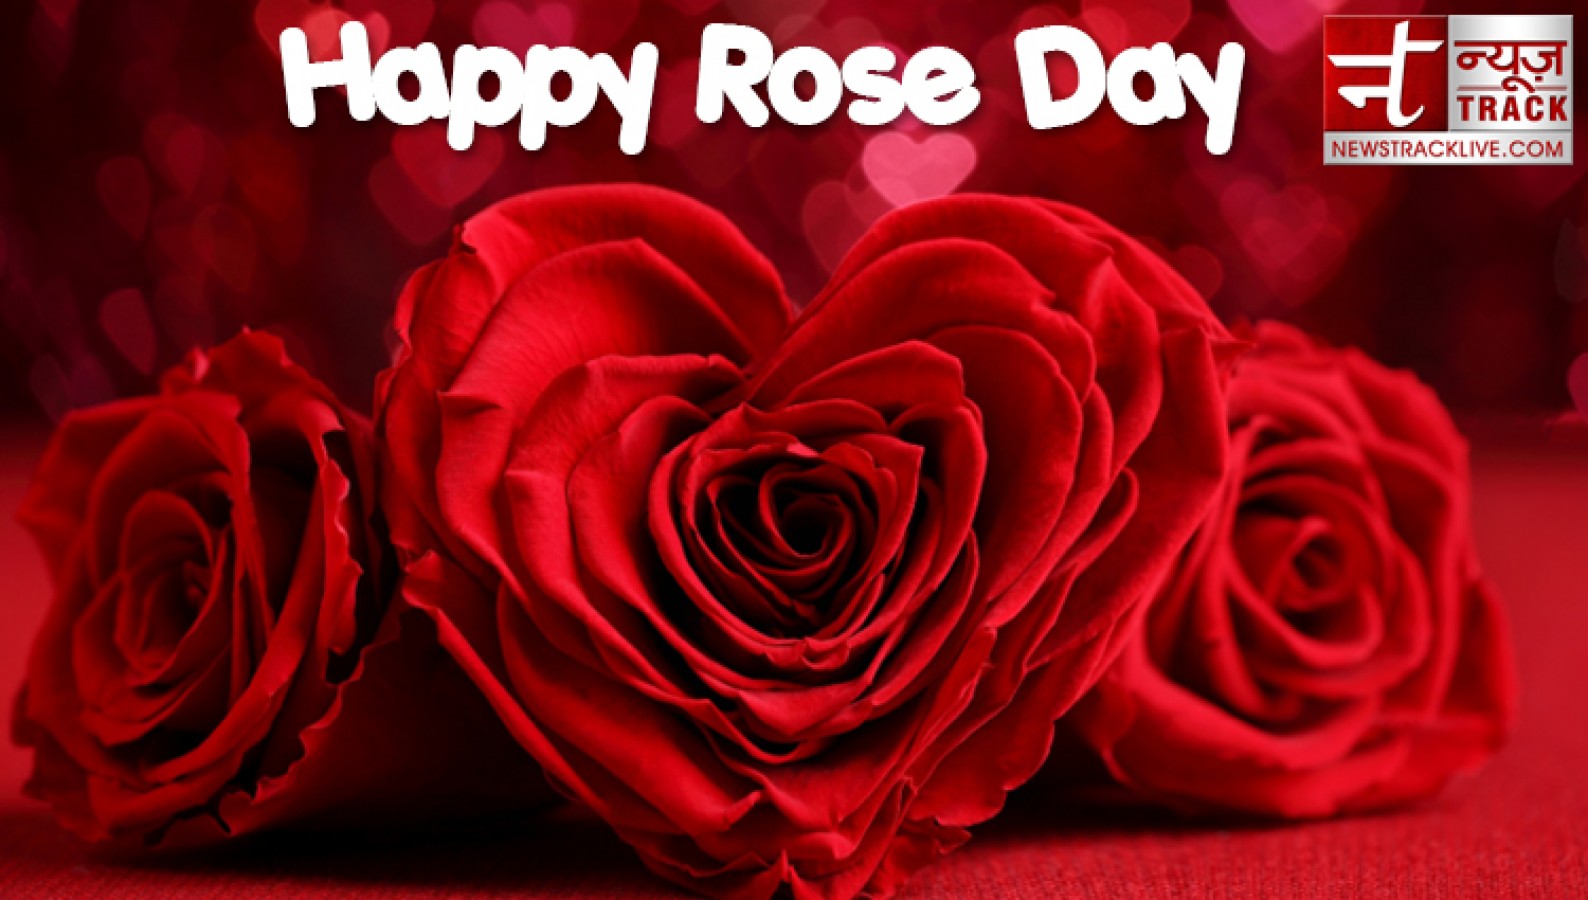 Rose day 2020: Rose day quotes to make this Rose Day special ...